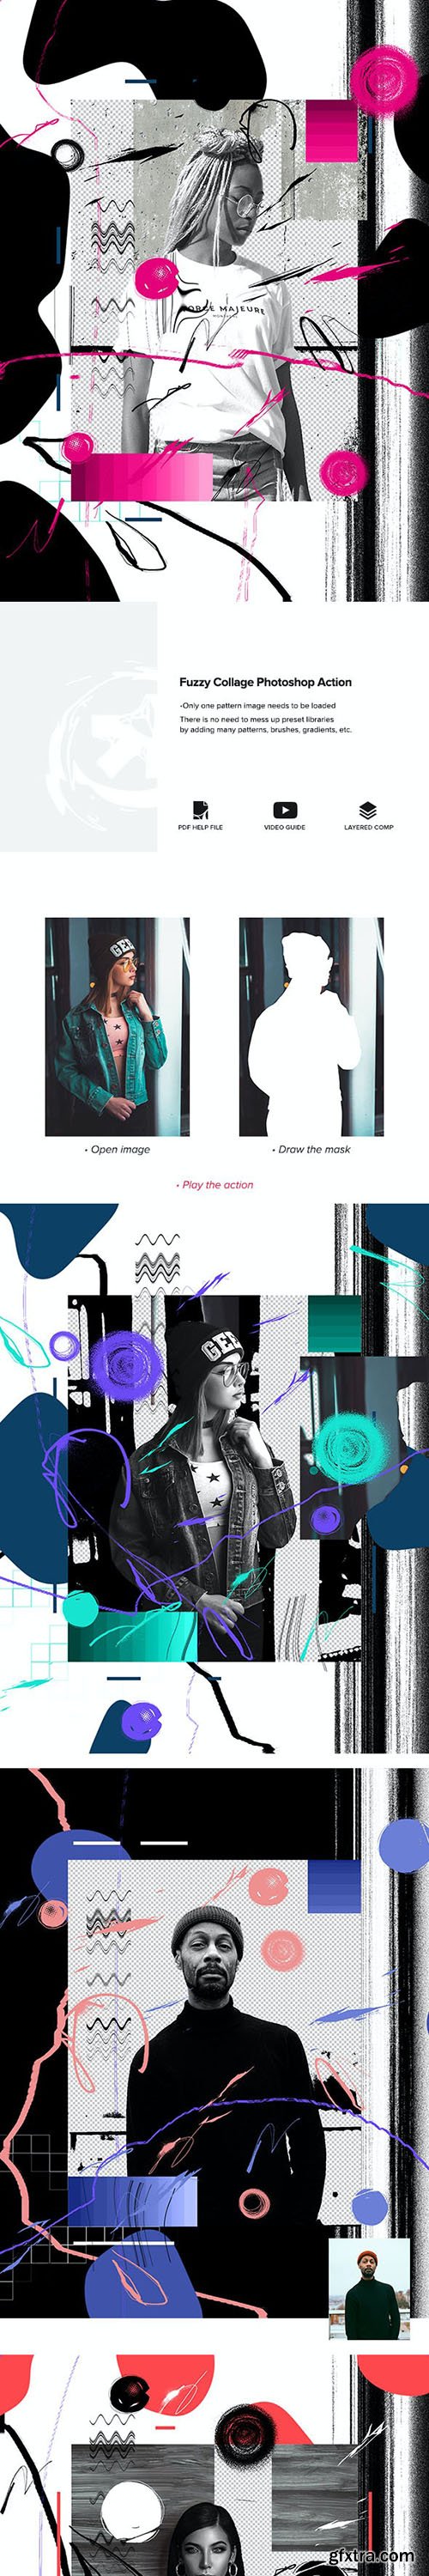 GraphicRiver - Fuzzy Collage Photoshop Action 24577994